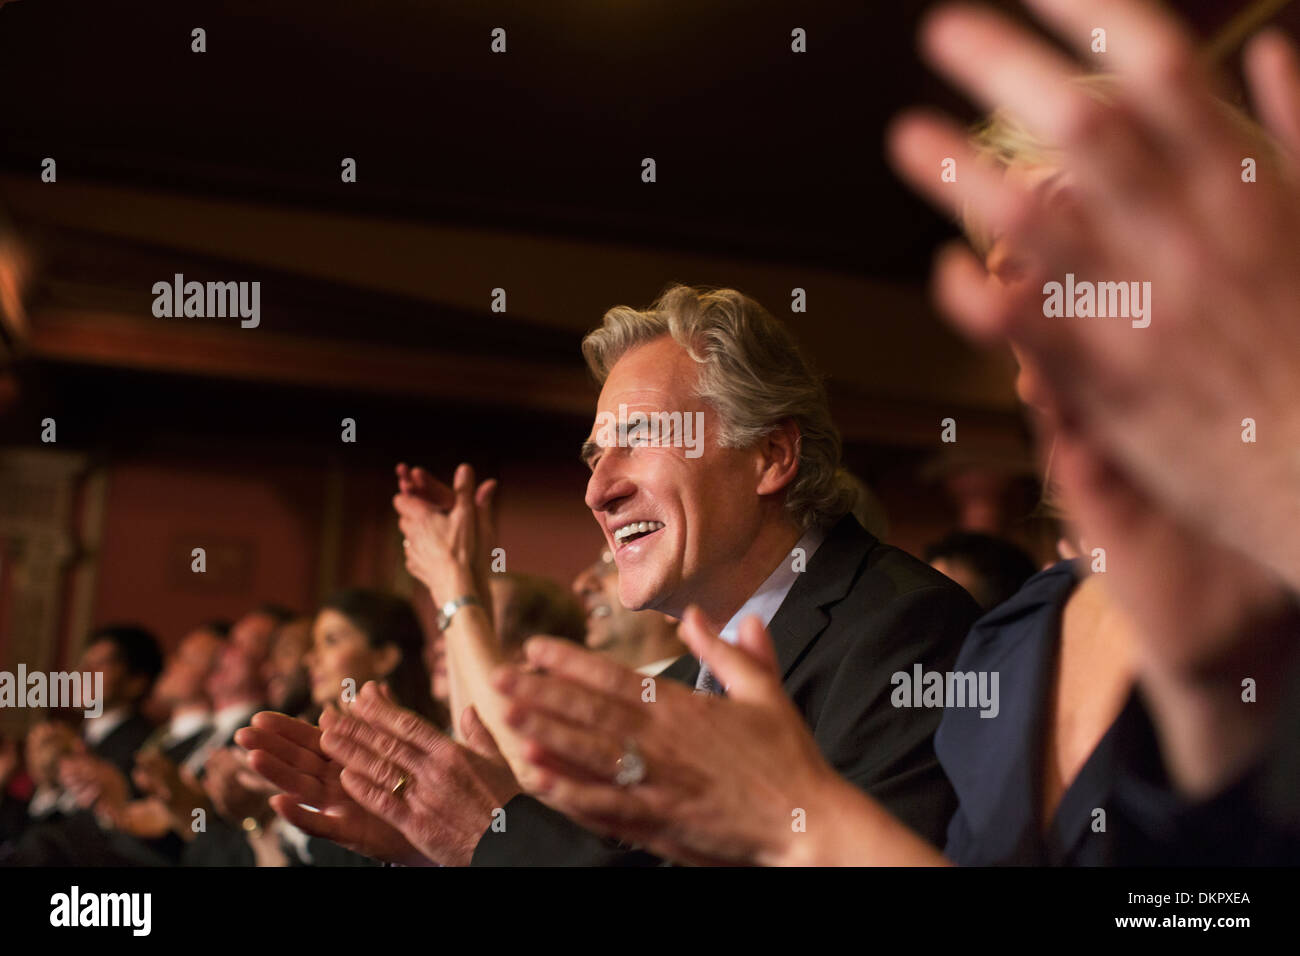 Enthusiastic man clapping in theater audience Stock Photo